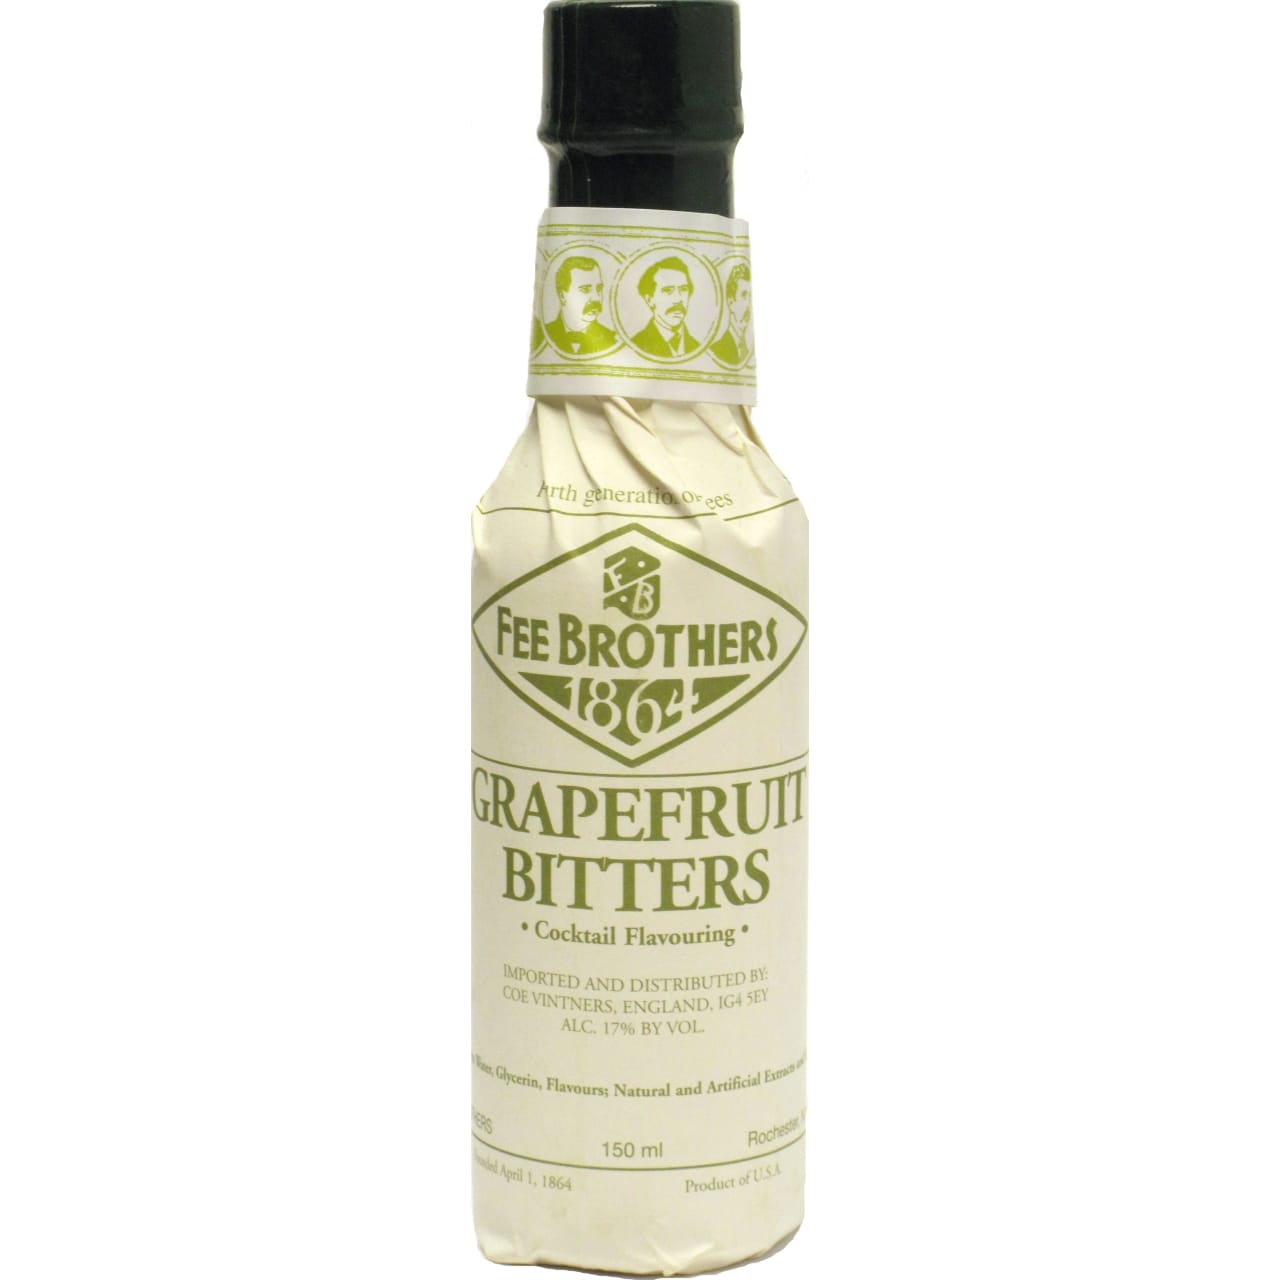 Combining the sweet and sour delicacy of the grapefruit with the classic herbaceous spice of bitters, fee brothers grapefruit bitters are a powerful weapon in the mixologist’s arsenal.